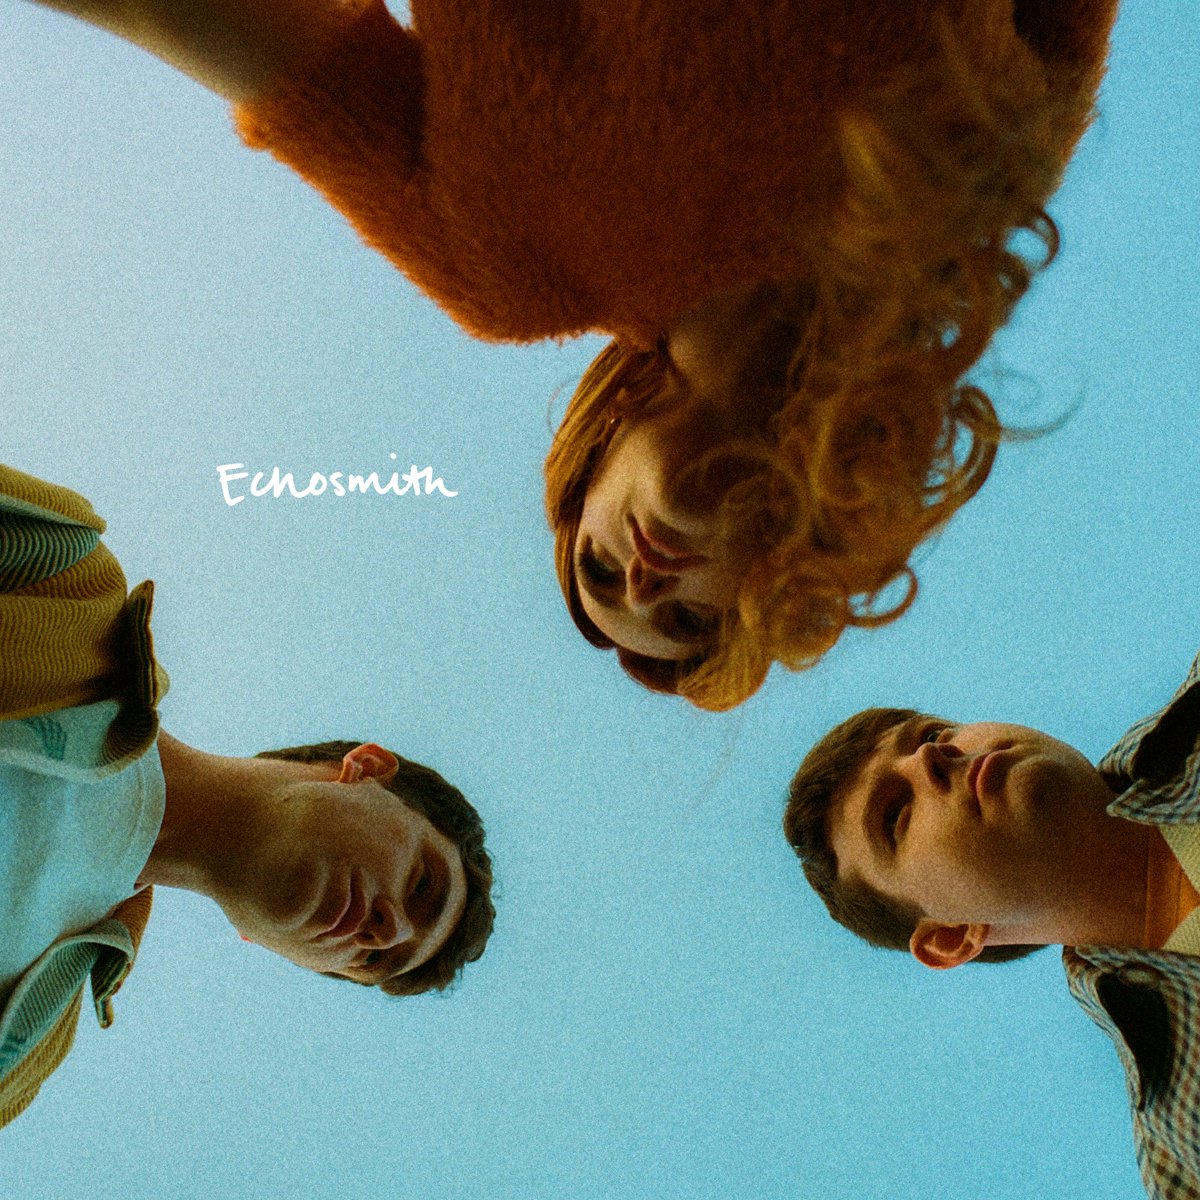 Our〚self-titled〛album out 7.28!!!!!!! 🦋🐬🪁🫐💙 Pre-save here: stem.ffm.to/echosmith